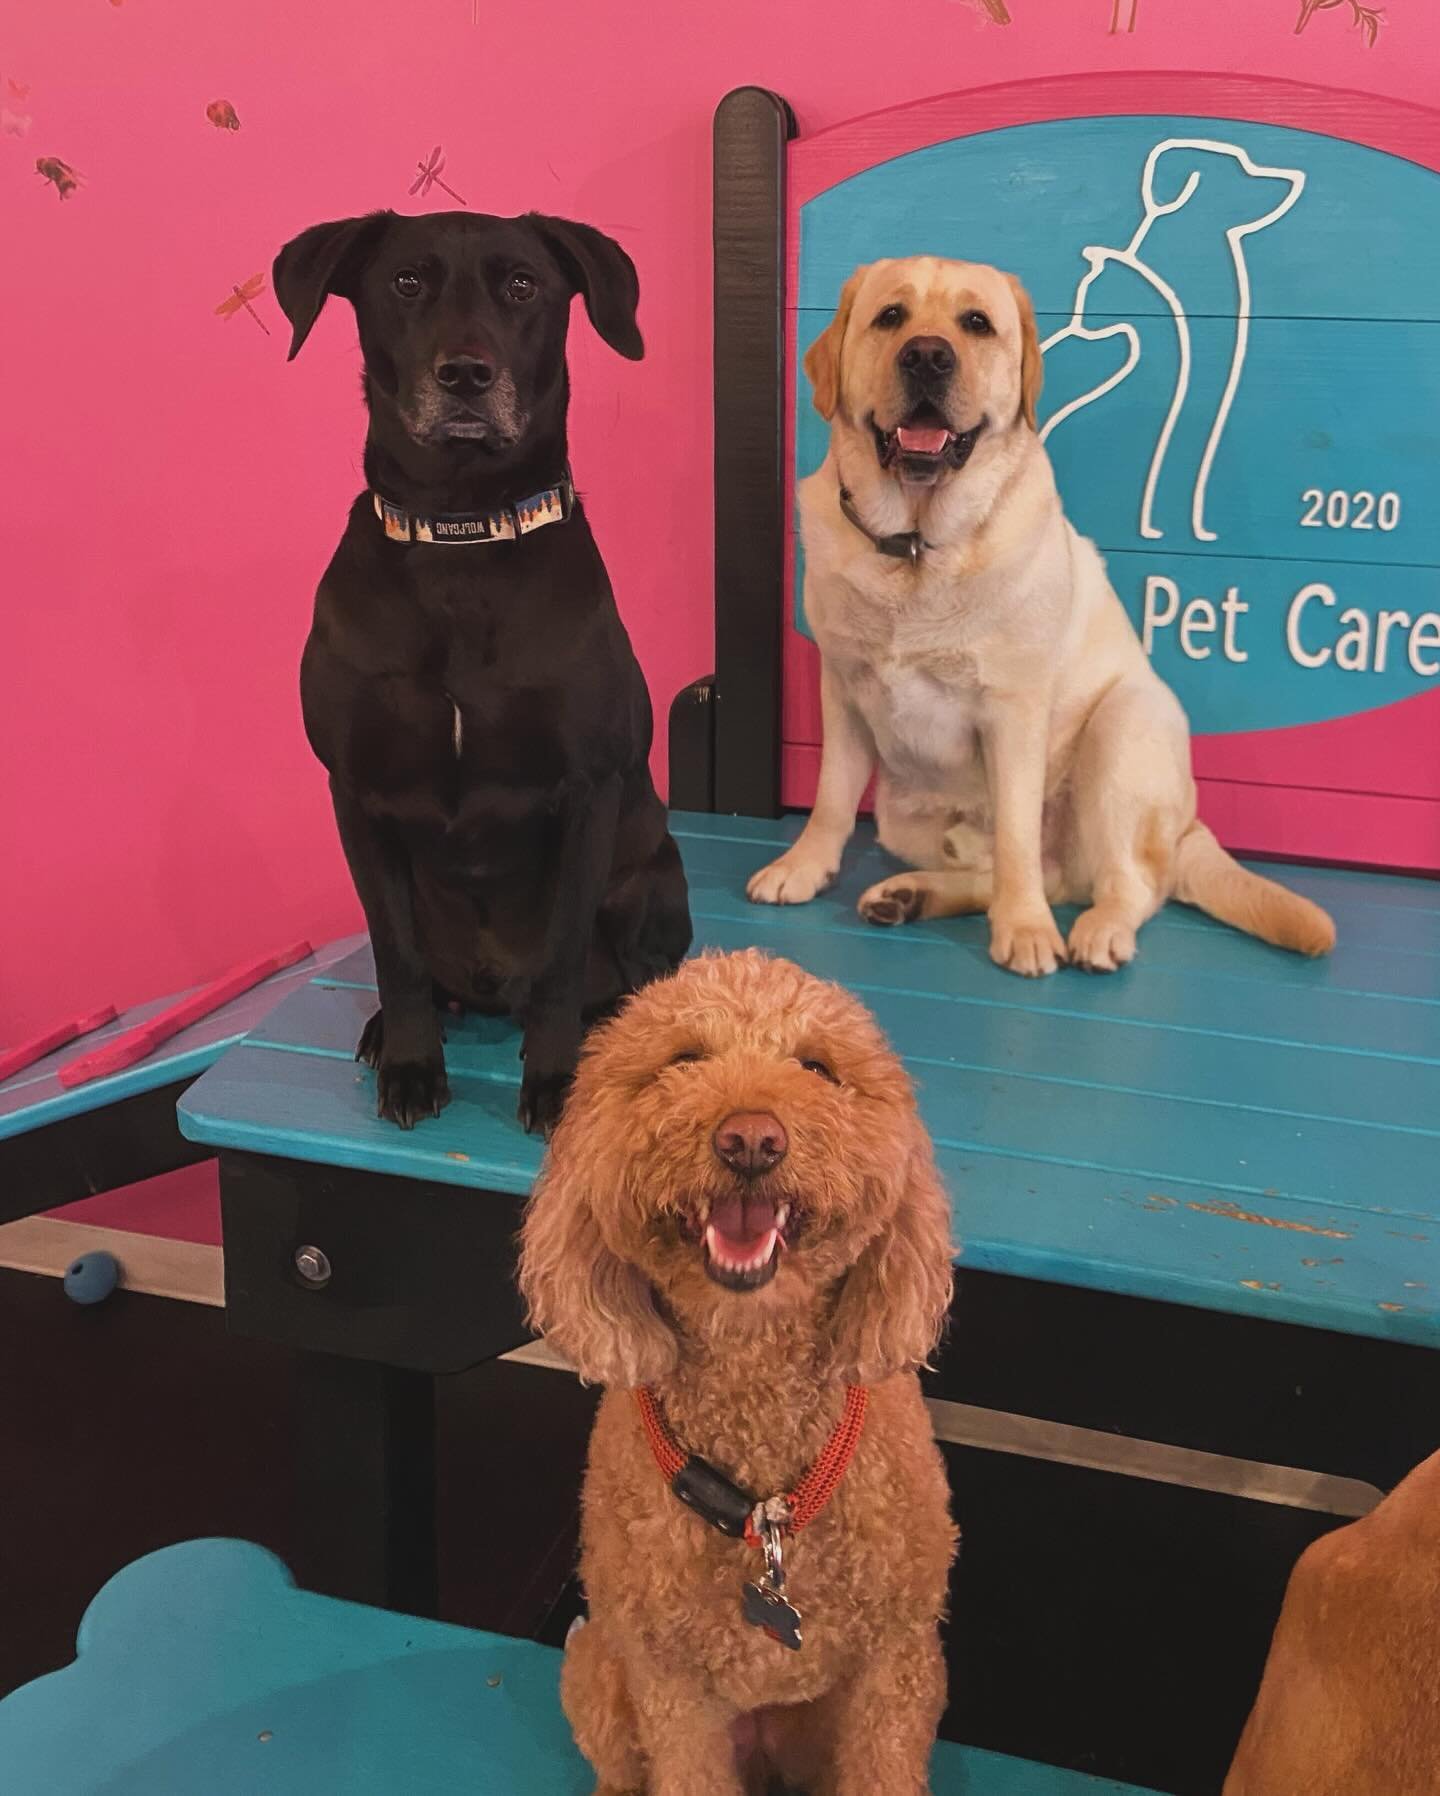 The pack is picture perfect 📸 keep swiping to see Toofy's tuesday mood 😝

🐶

#dogsofchicago #dogparty #pawtytime #hfpc #doggydaycare #doglove #cutedogs #puppies #cute